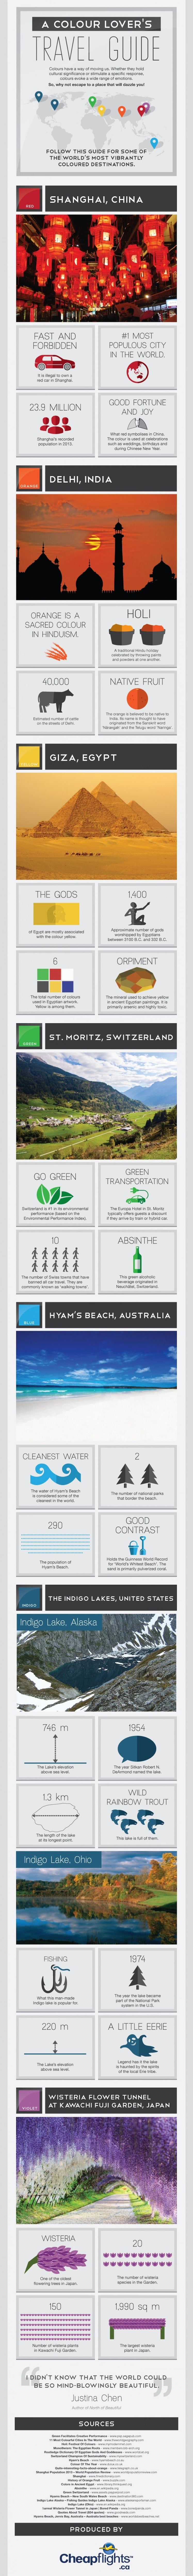 a-colour-lovers-travel-guide-infographic_52f1145c5f349_w1500 (2)